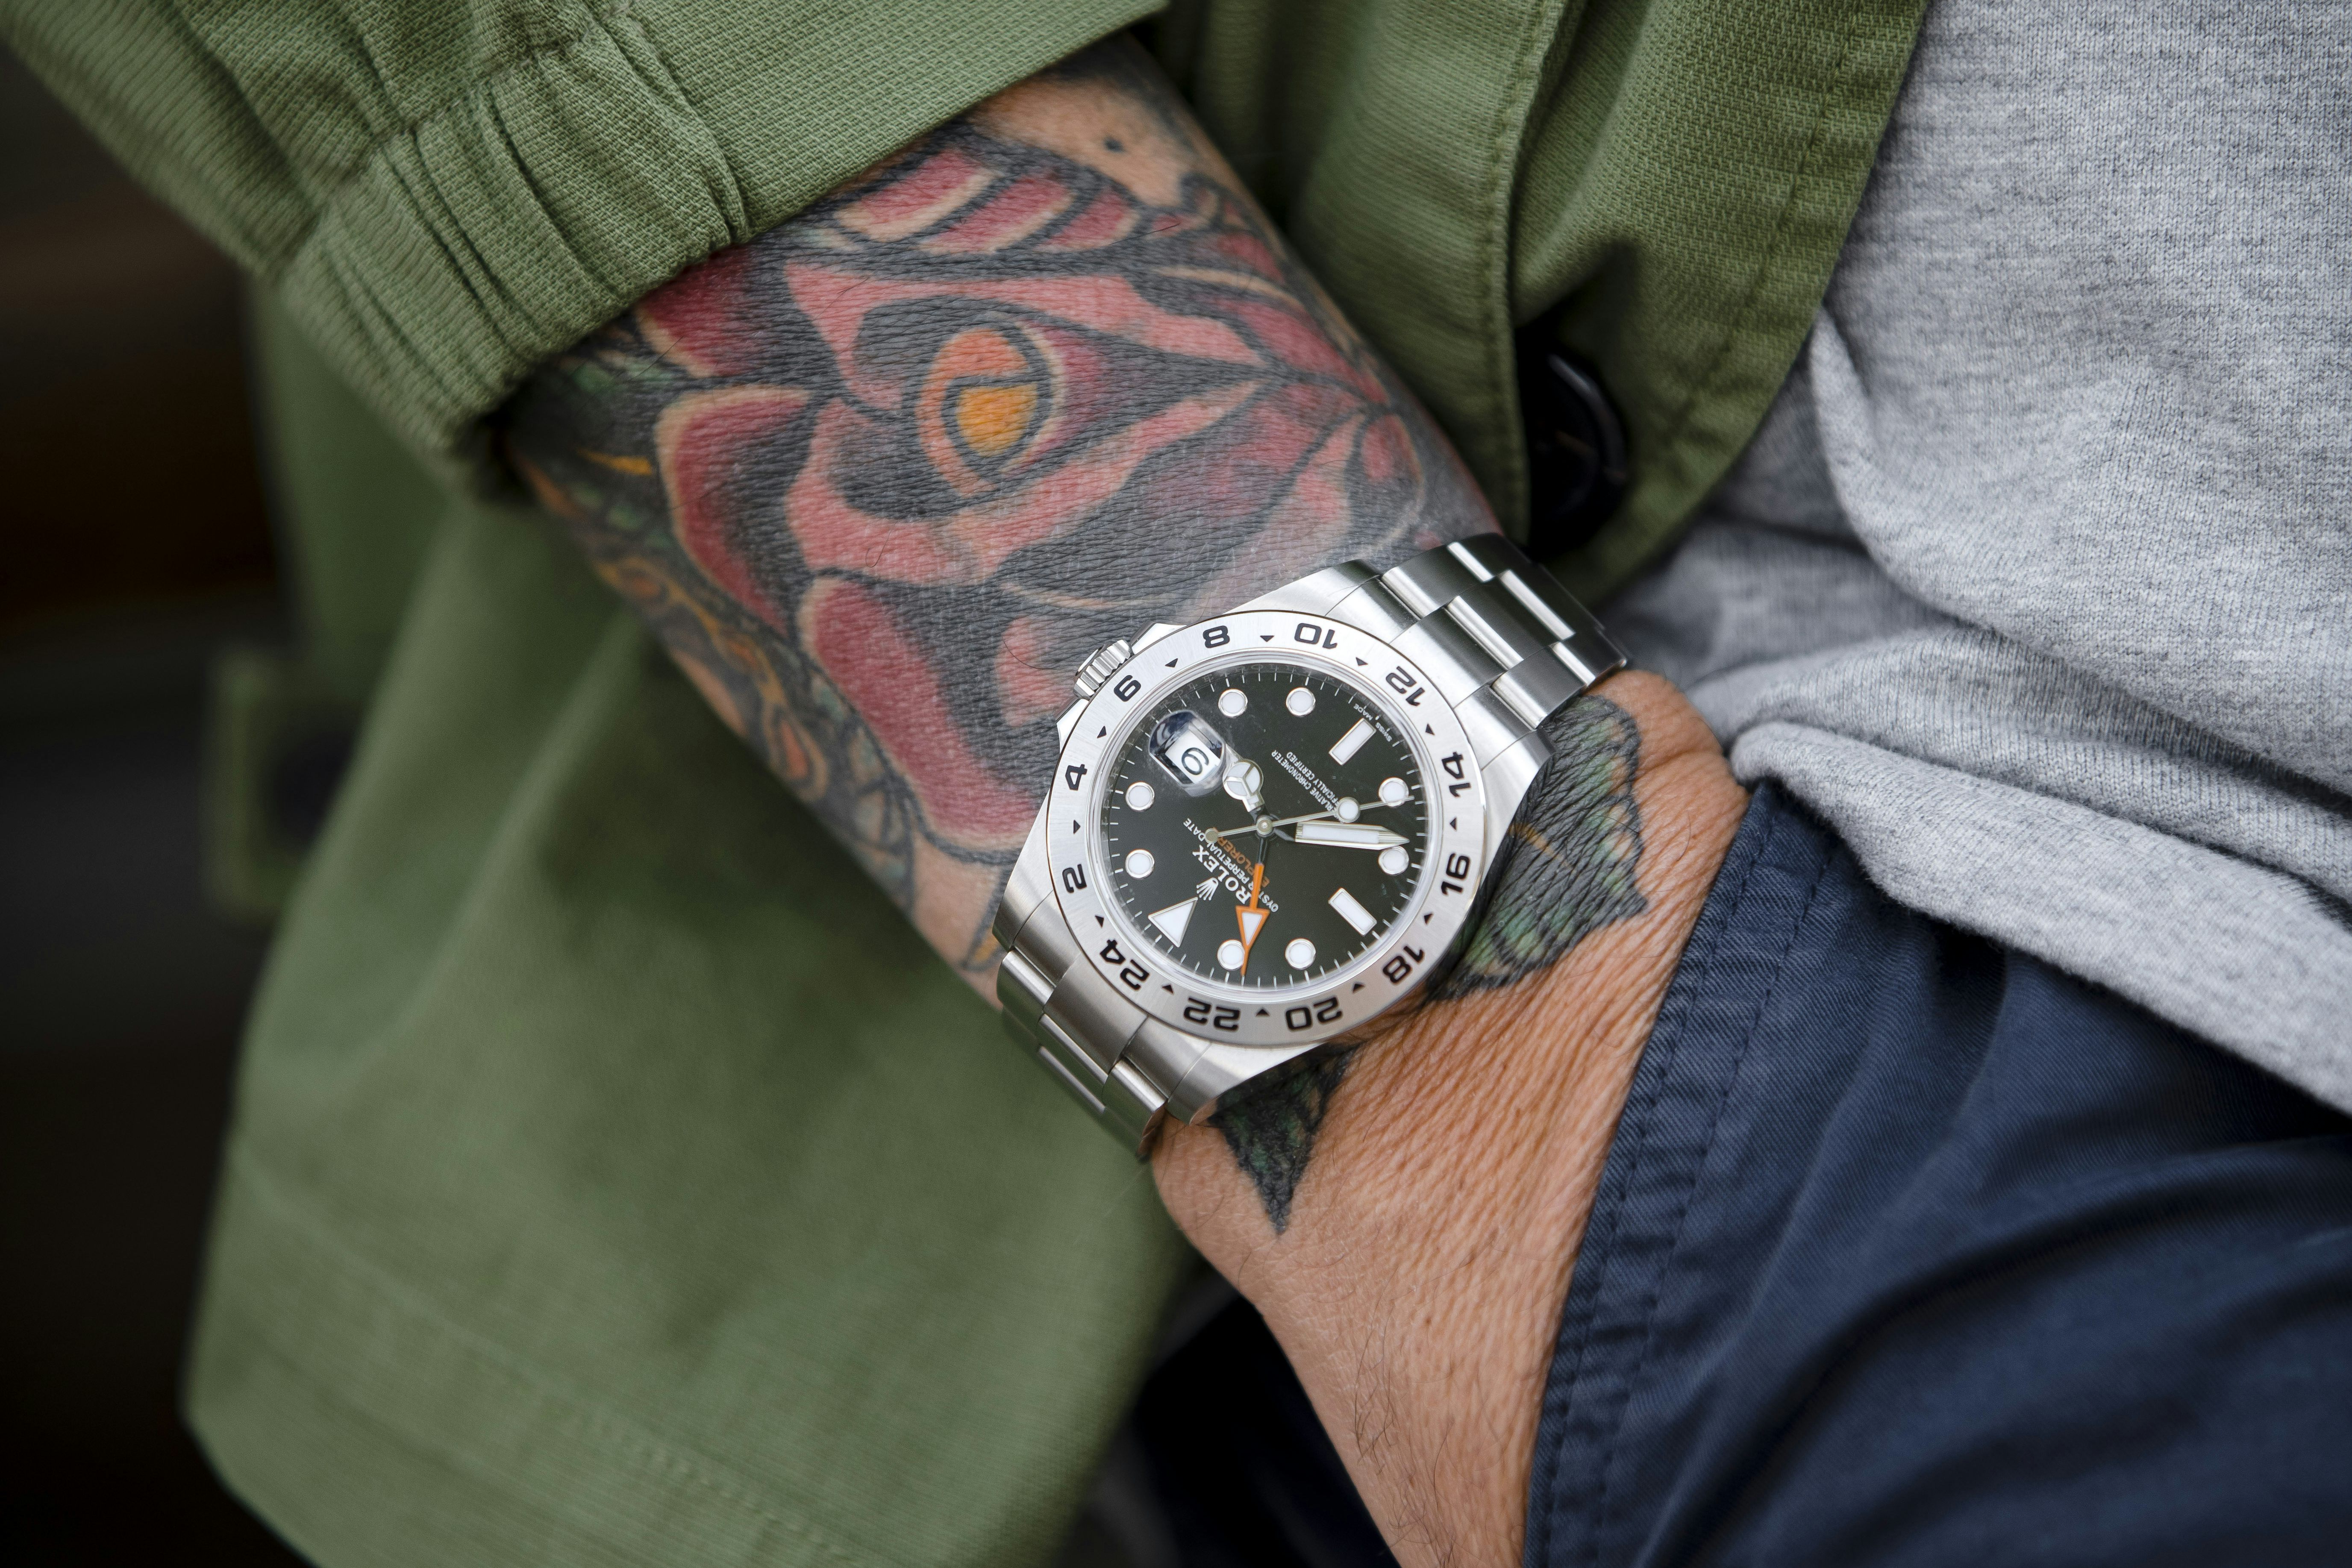 45 Pitti - Stole Uomo Street-Style Show Hodinkee That The At Watches Report: Photo